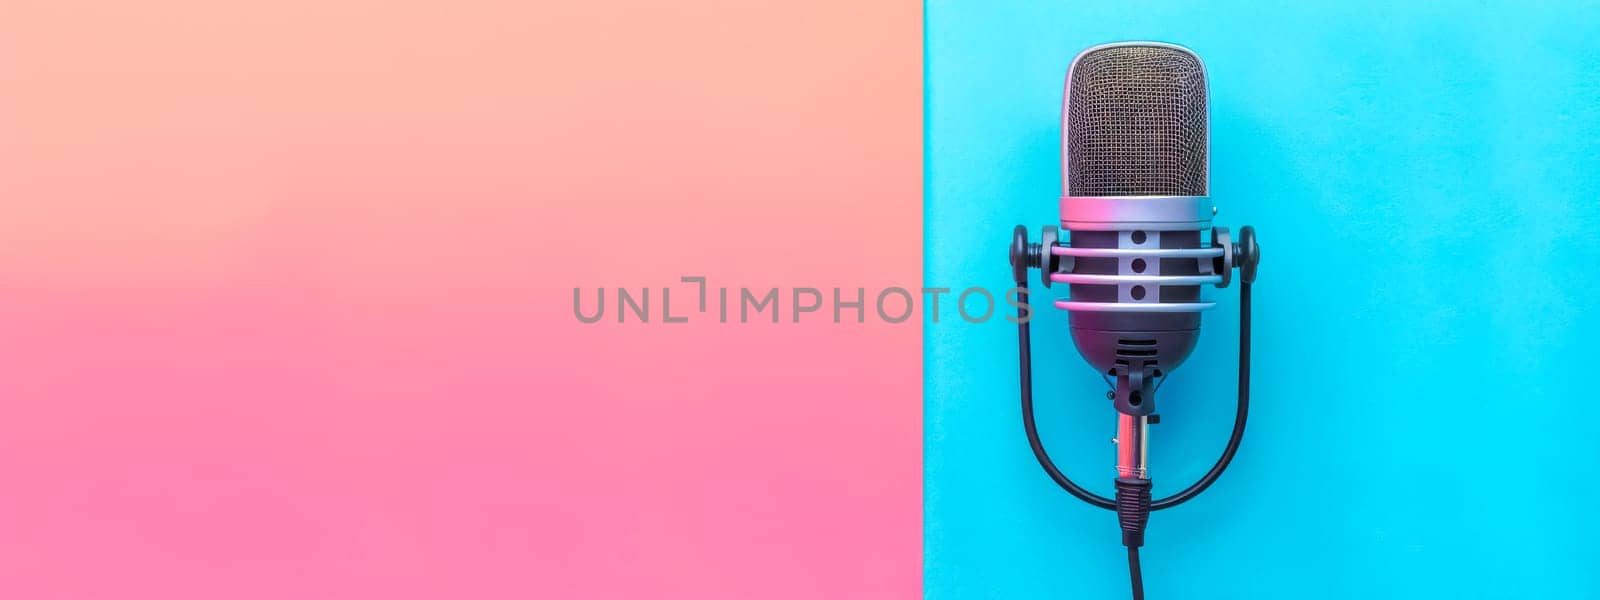 Vintage microphone on a dual-tone pastel background, ideal for podcasts or music themes